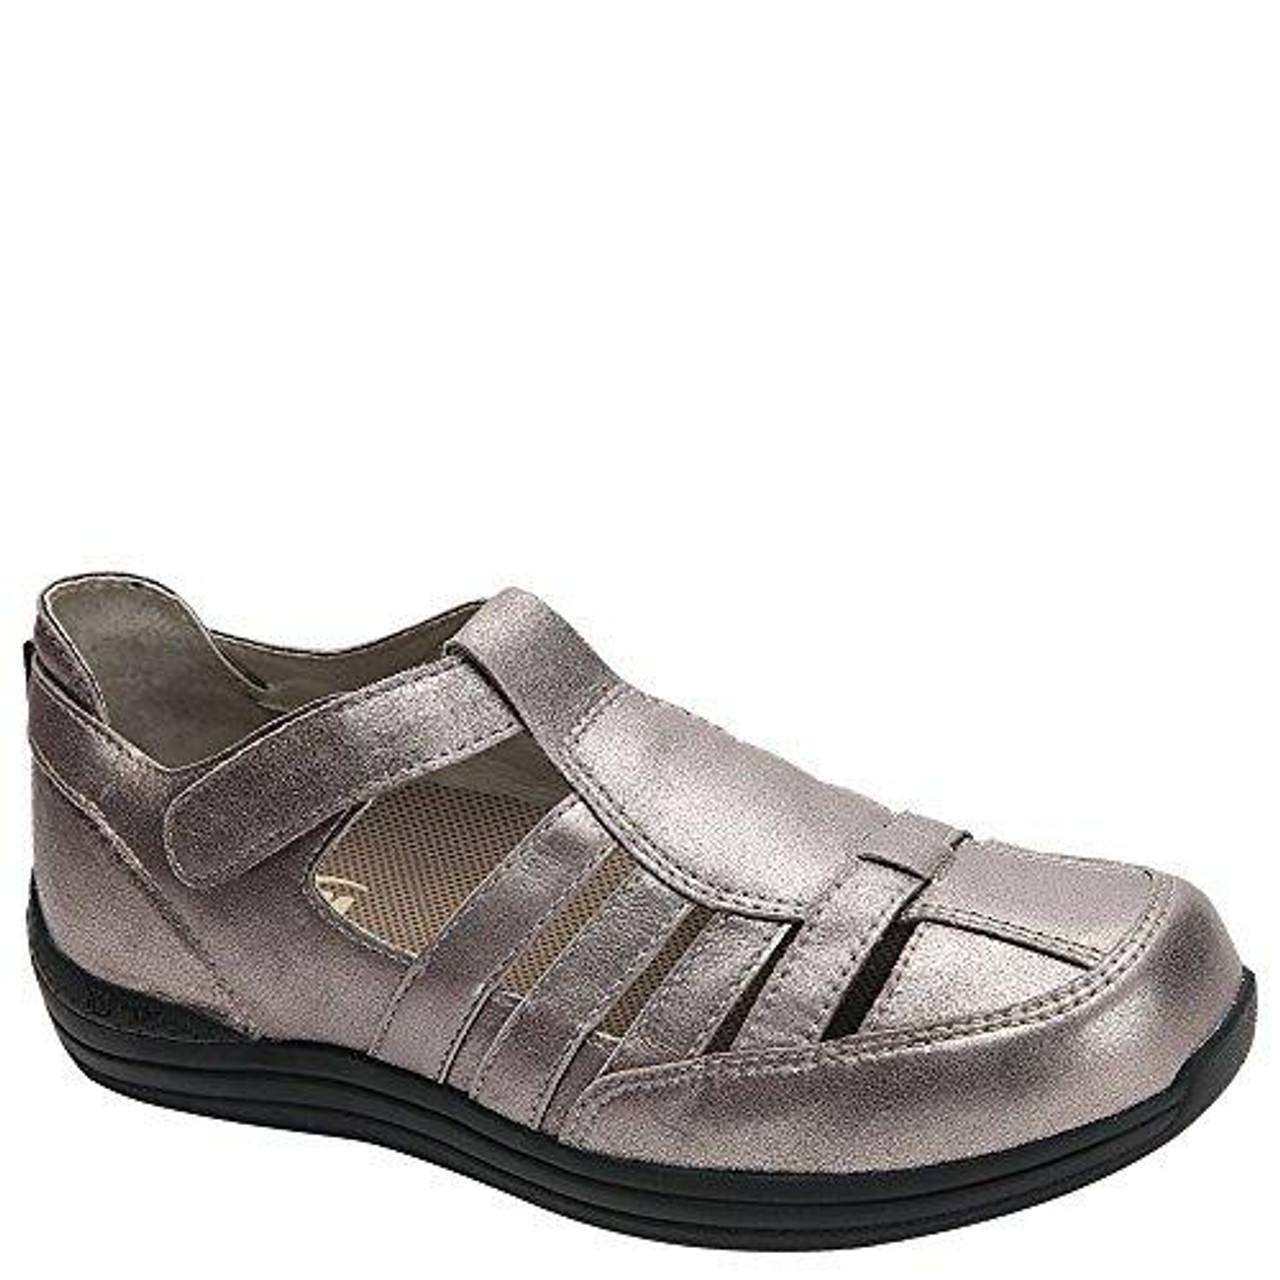 Drew Ginger - Women's - Casual Therapeutic Shoe - Free Shipping